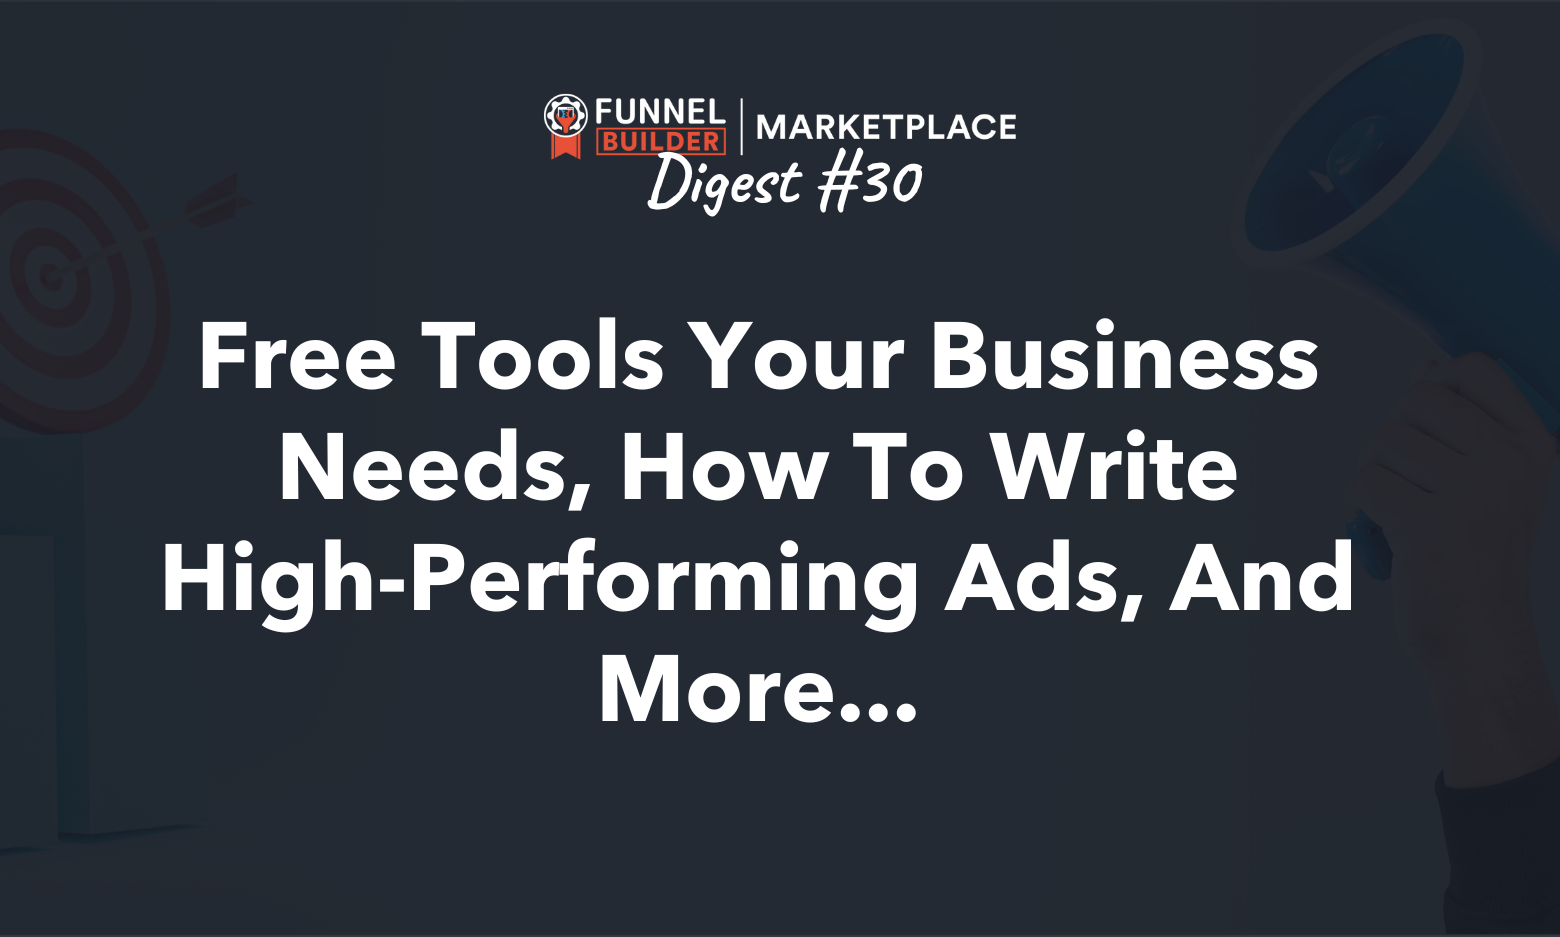 FBM Digest #30: Free tools your business needs, how to write high-performing ads, and more...